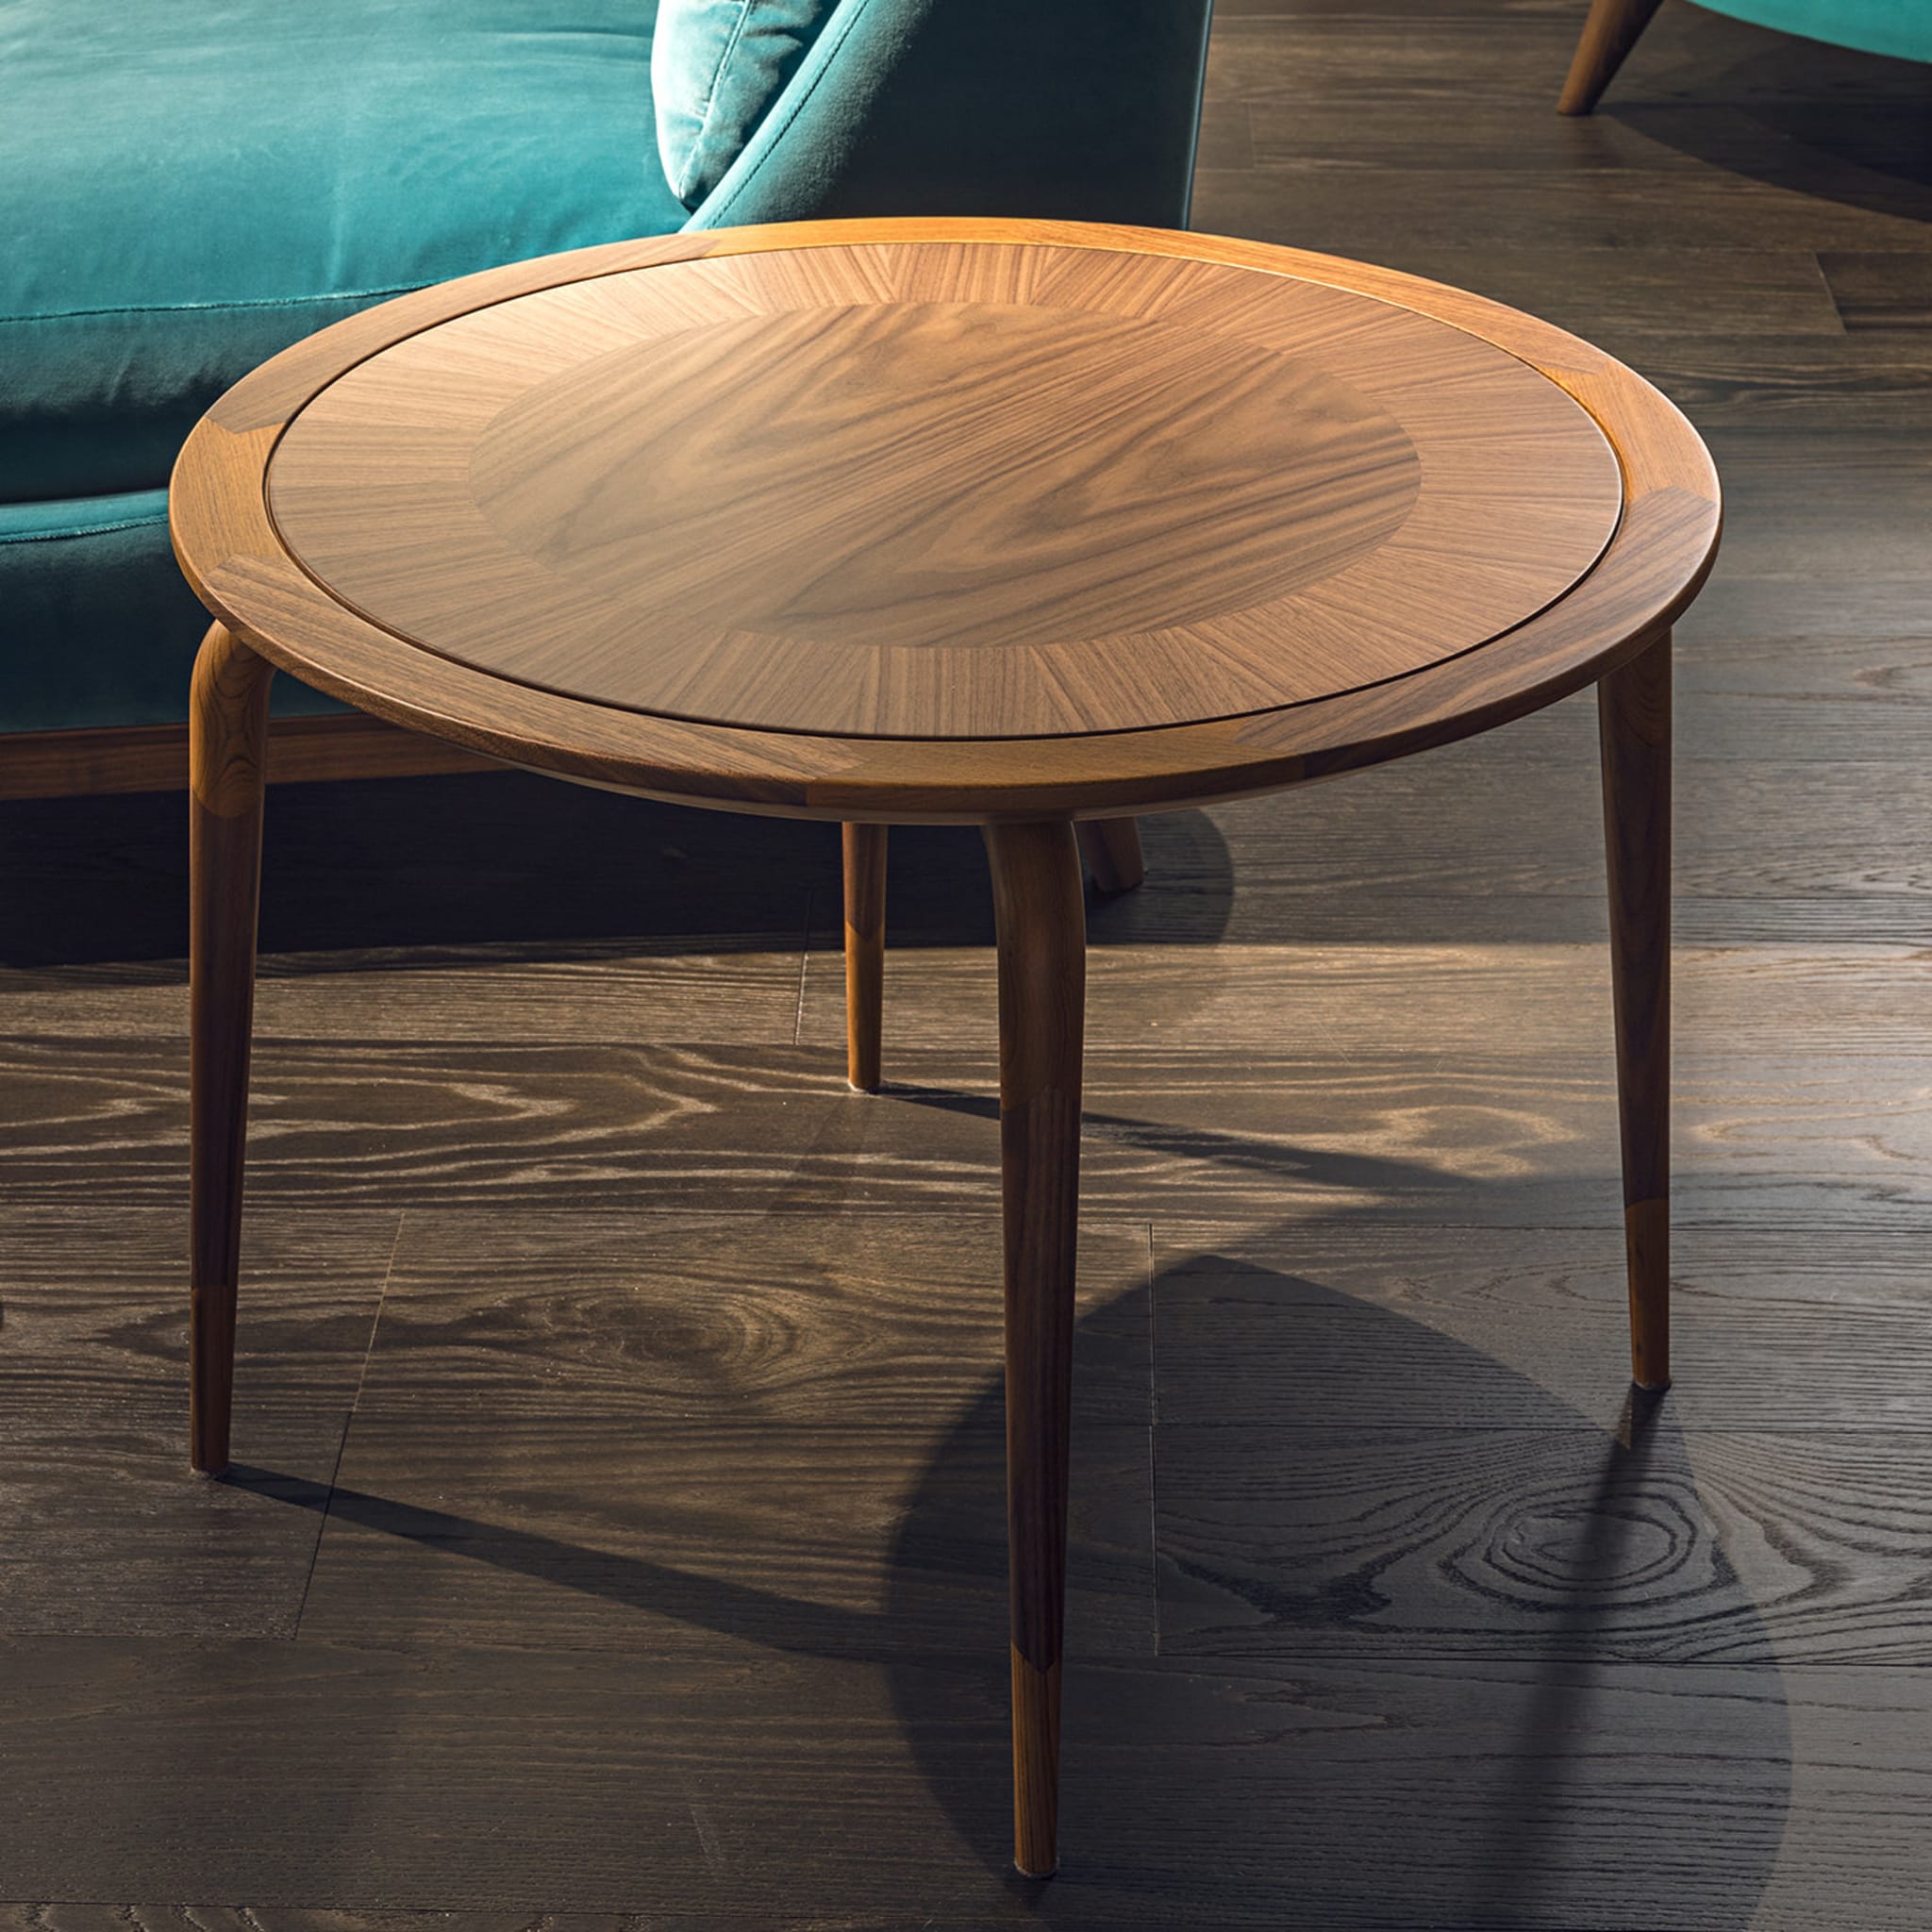 Rosetta Side Table by Luciano Colombo - Alternative view 2